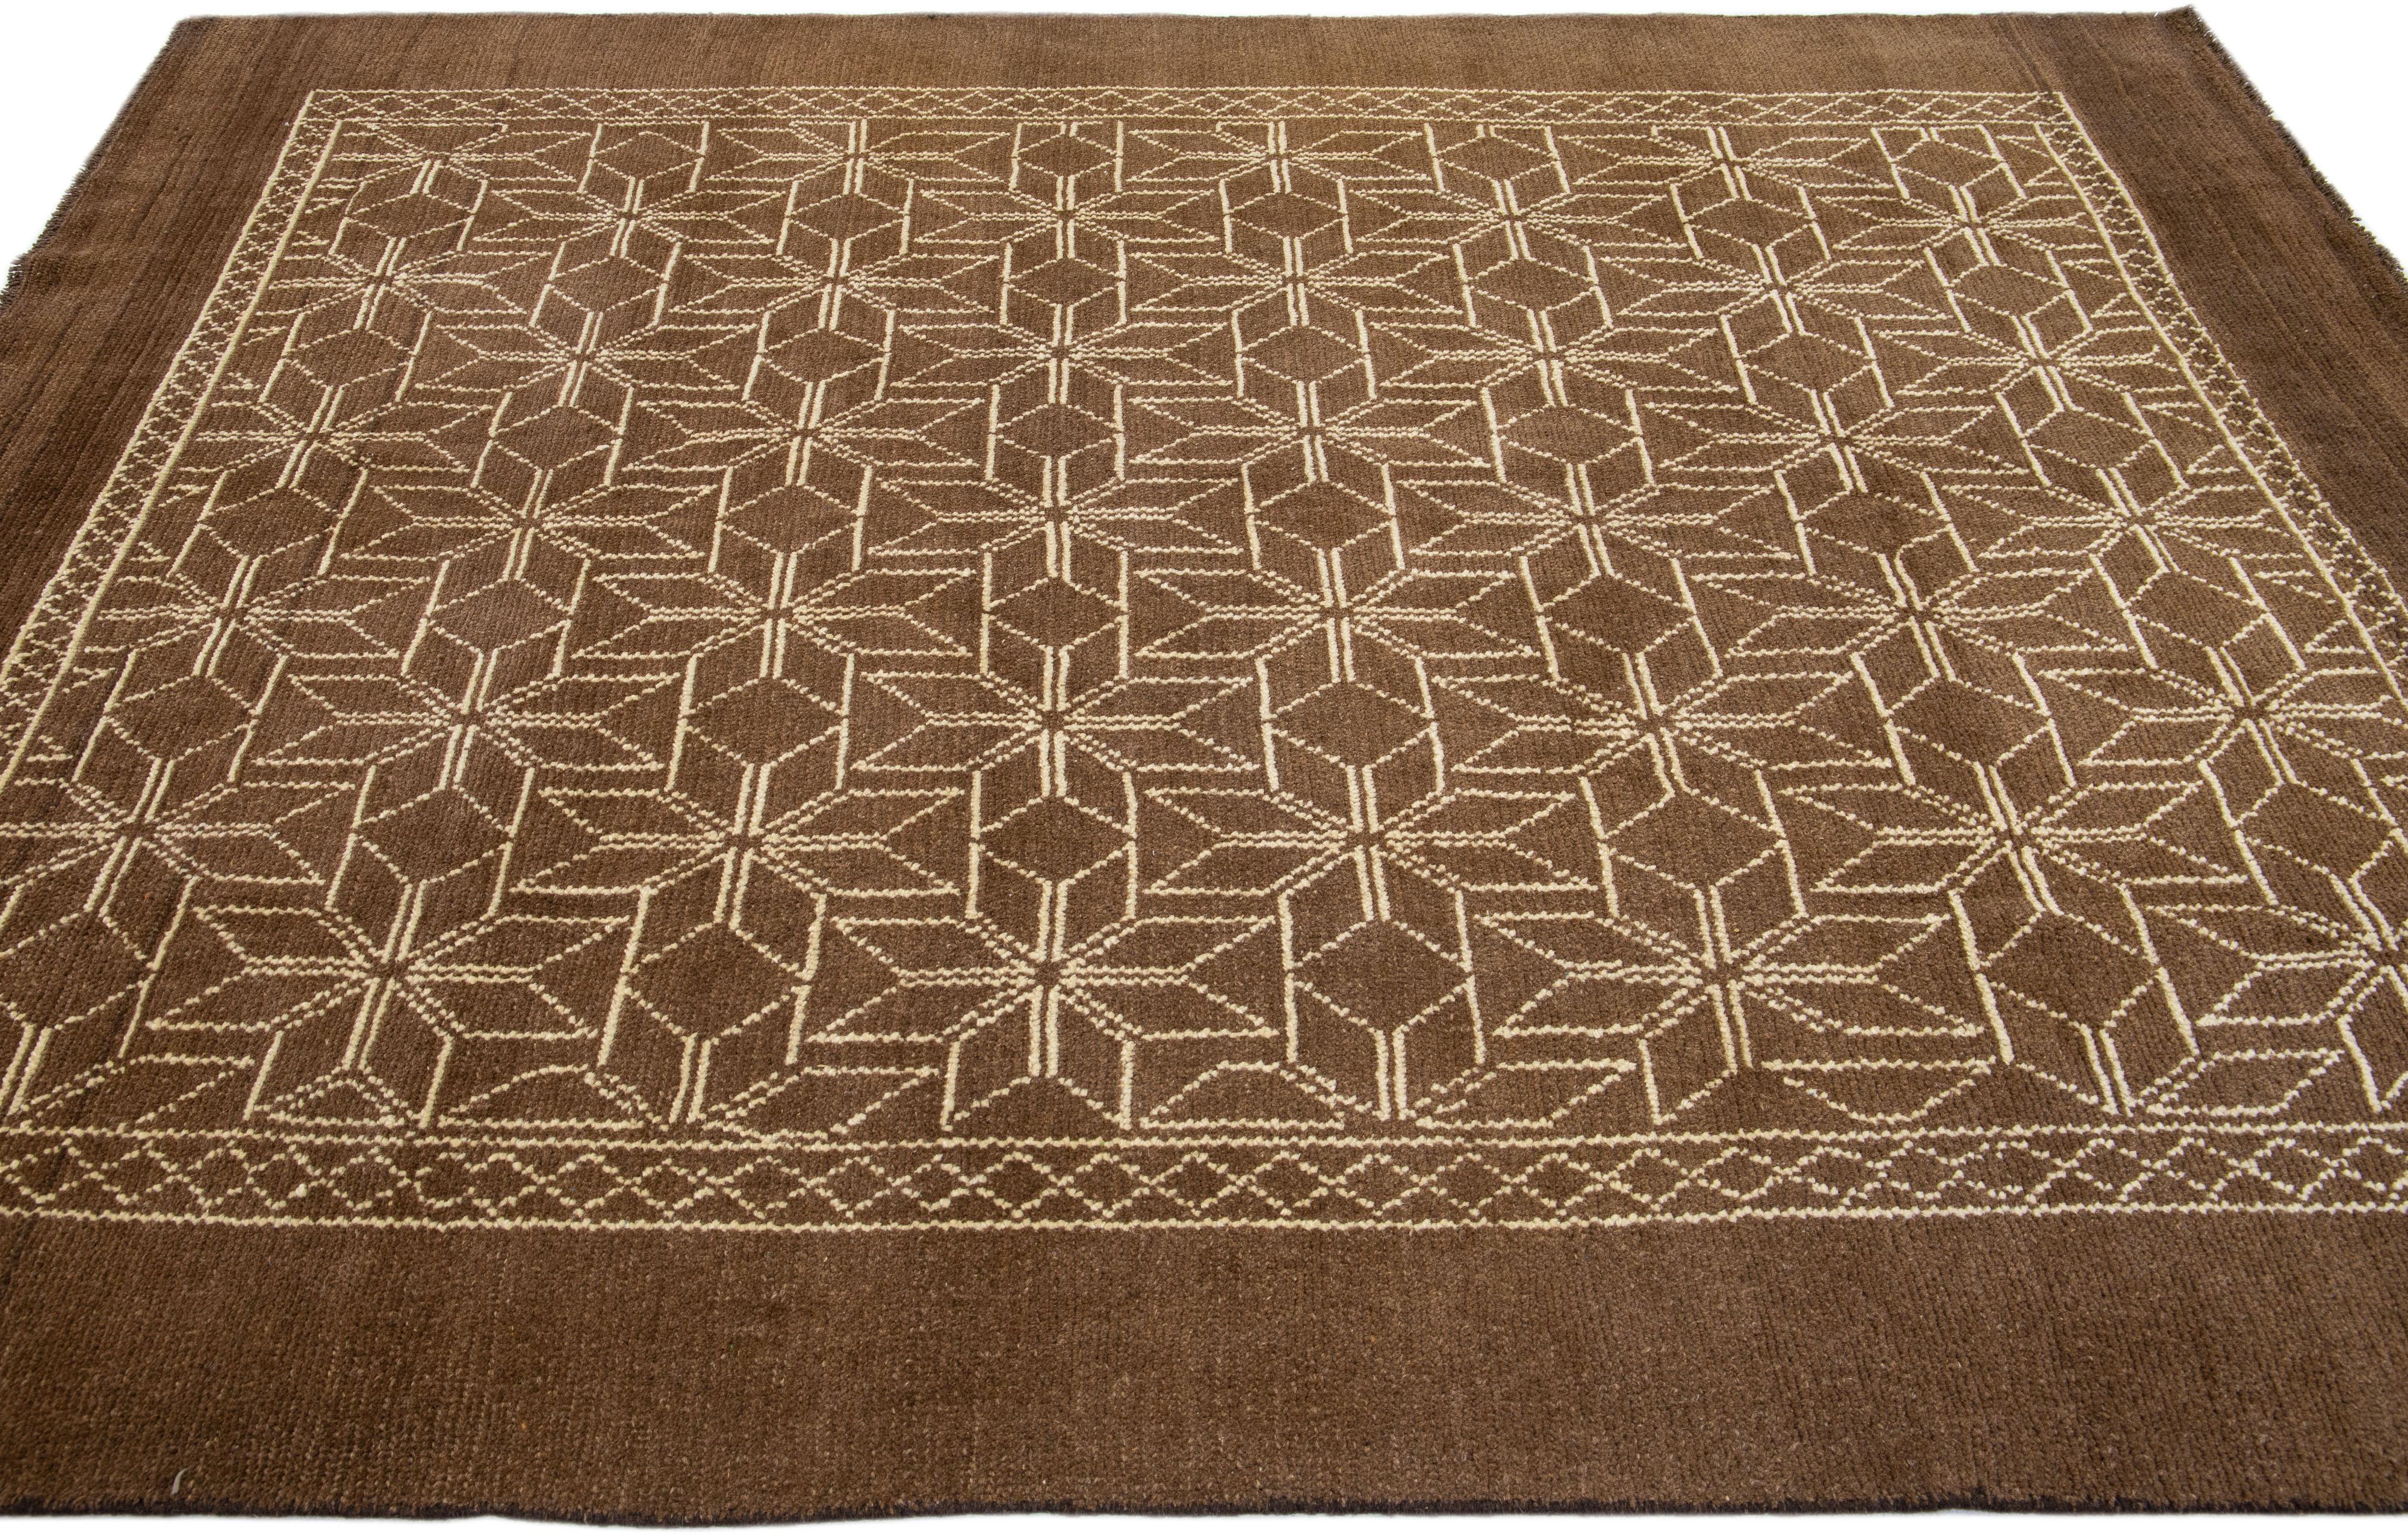 Geometric Modern Moroccan Style Handmade Brown Wool Rug by Apadana In New Condition For Sale In Norwalk, CT